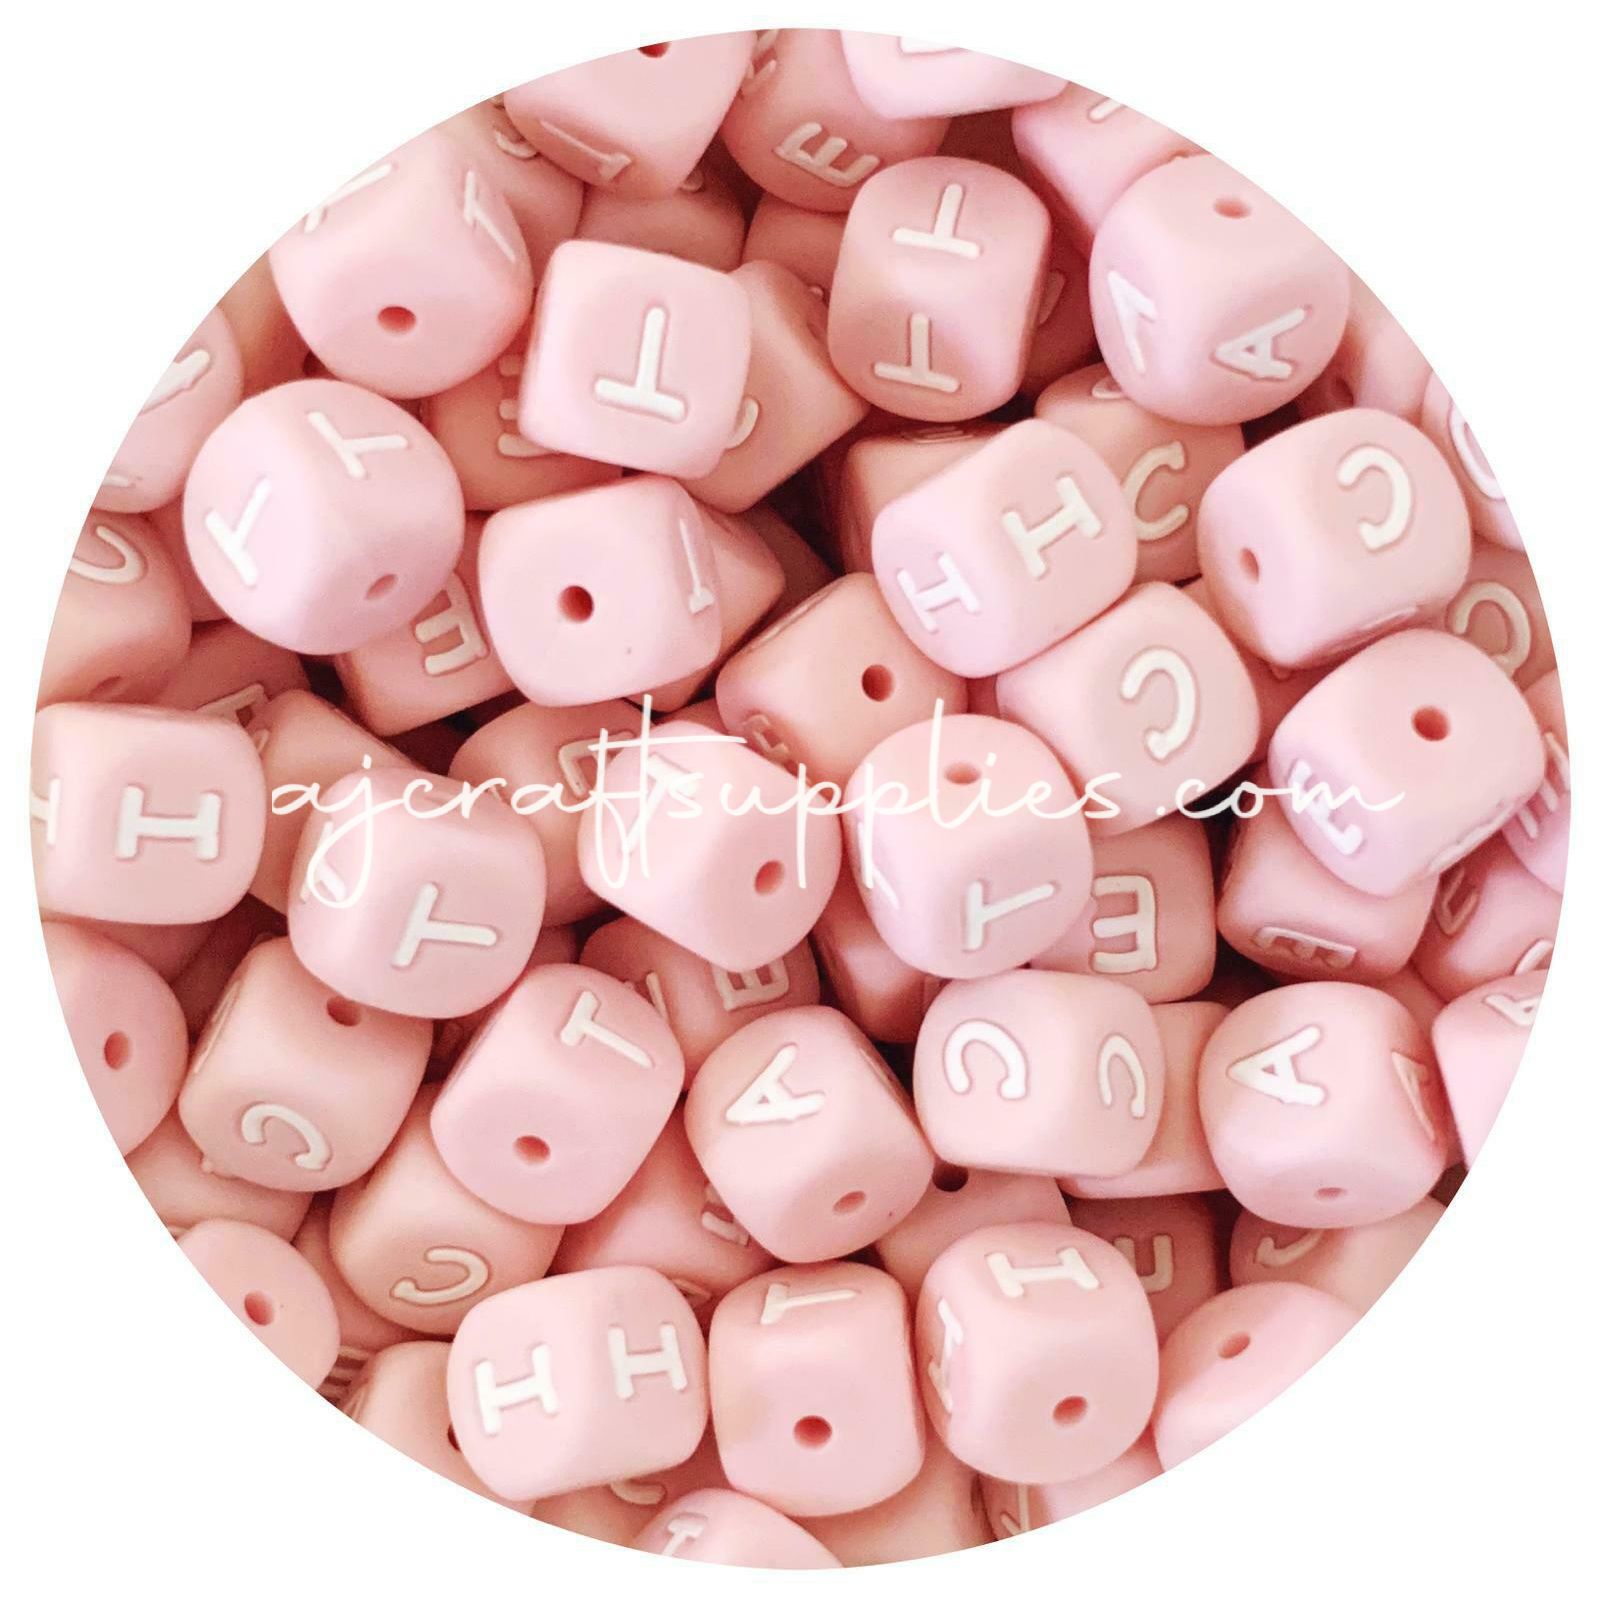 12mm Blush Pink Silicone Letter Beads MIXED PACK - 50 beads